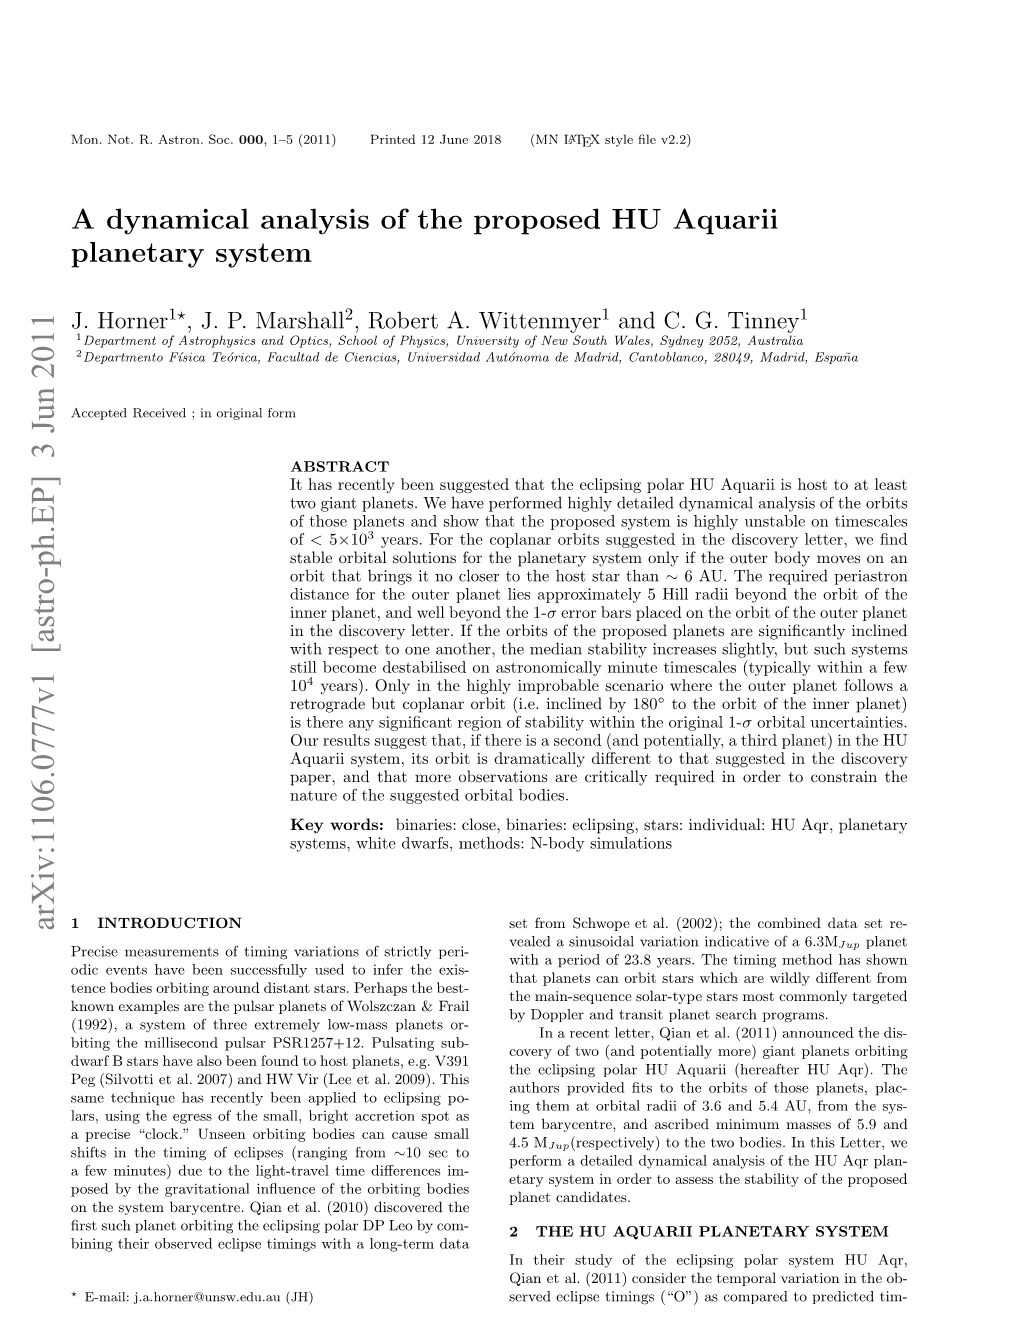 A Dynamical Analysis of the Proposed HU Aquarii Planetary System 3 Given in Qian Et Al